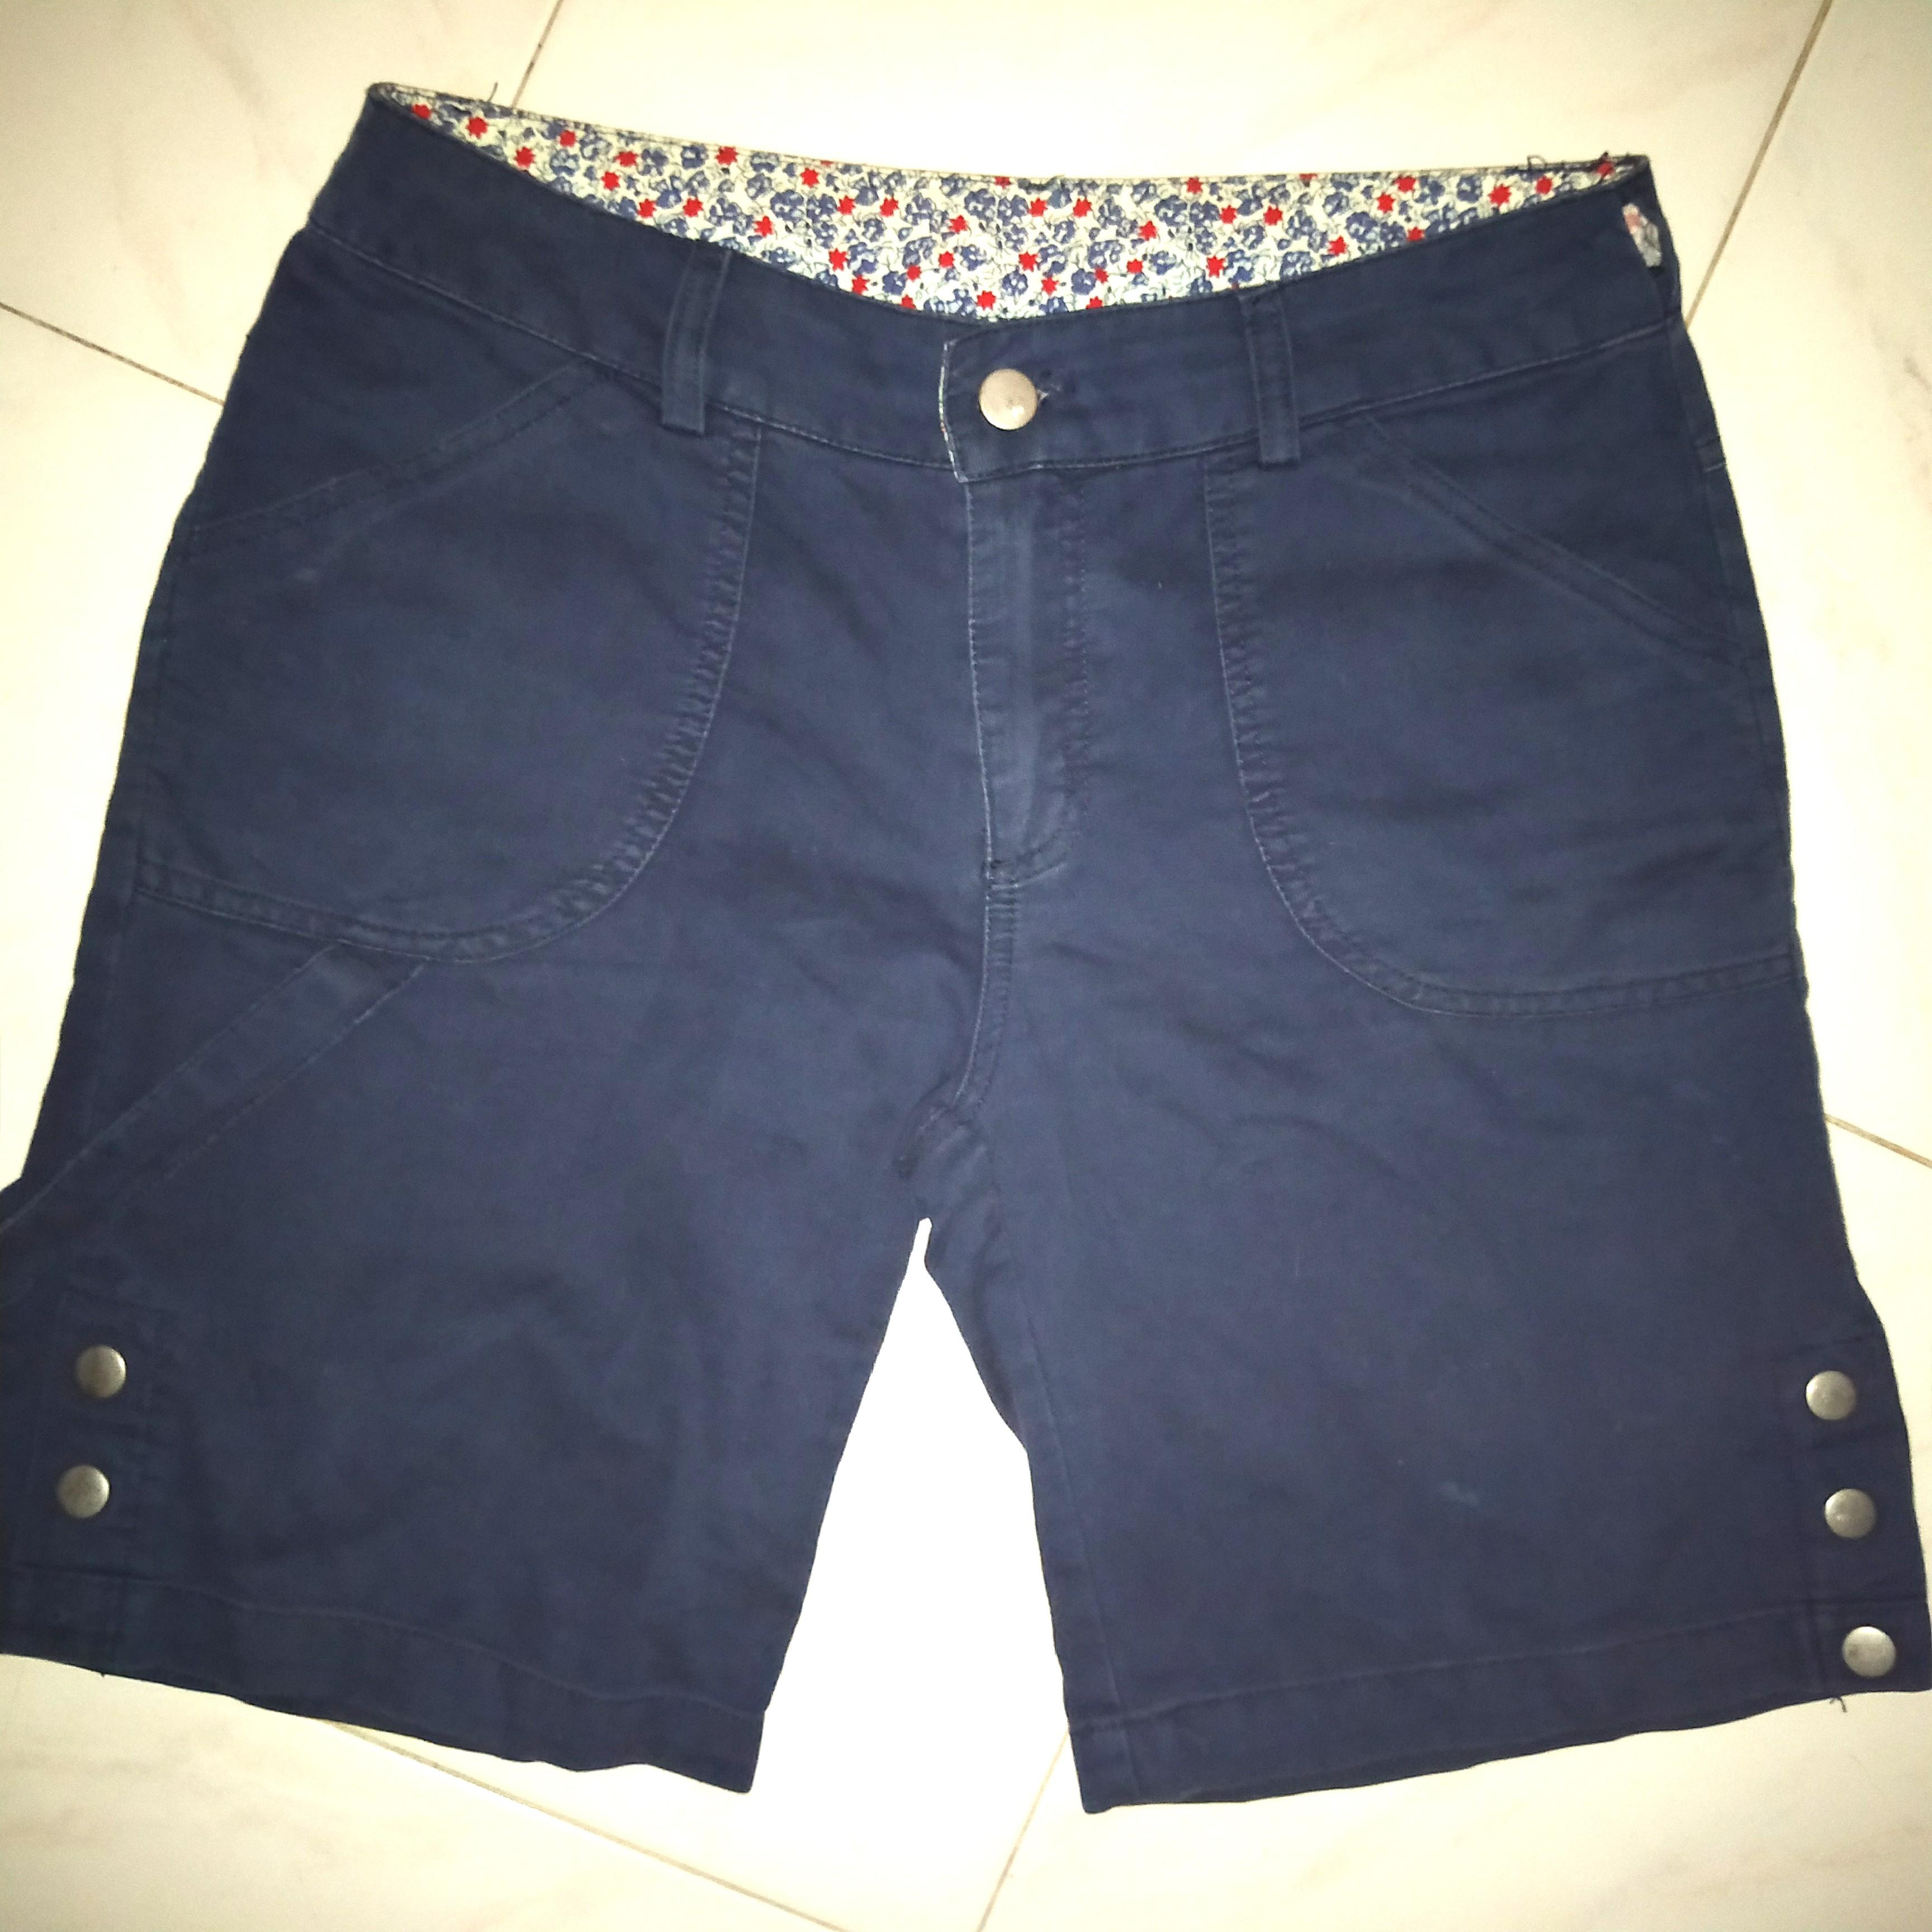 Dark Blue Shorts Size M Women S Fashion Clothes Pants Jeans Shorts On Carousell,Snow In Sahara Desert